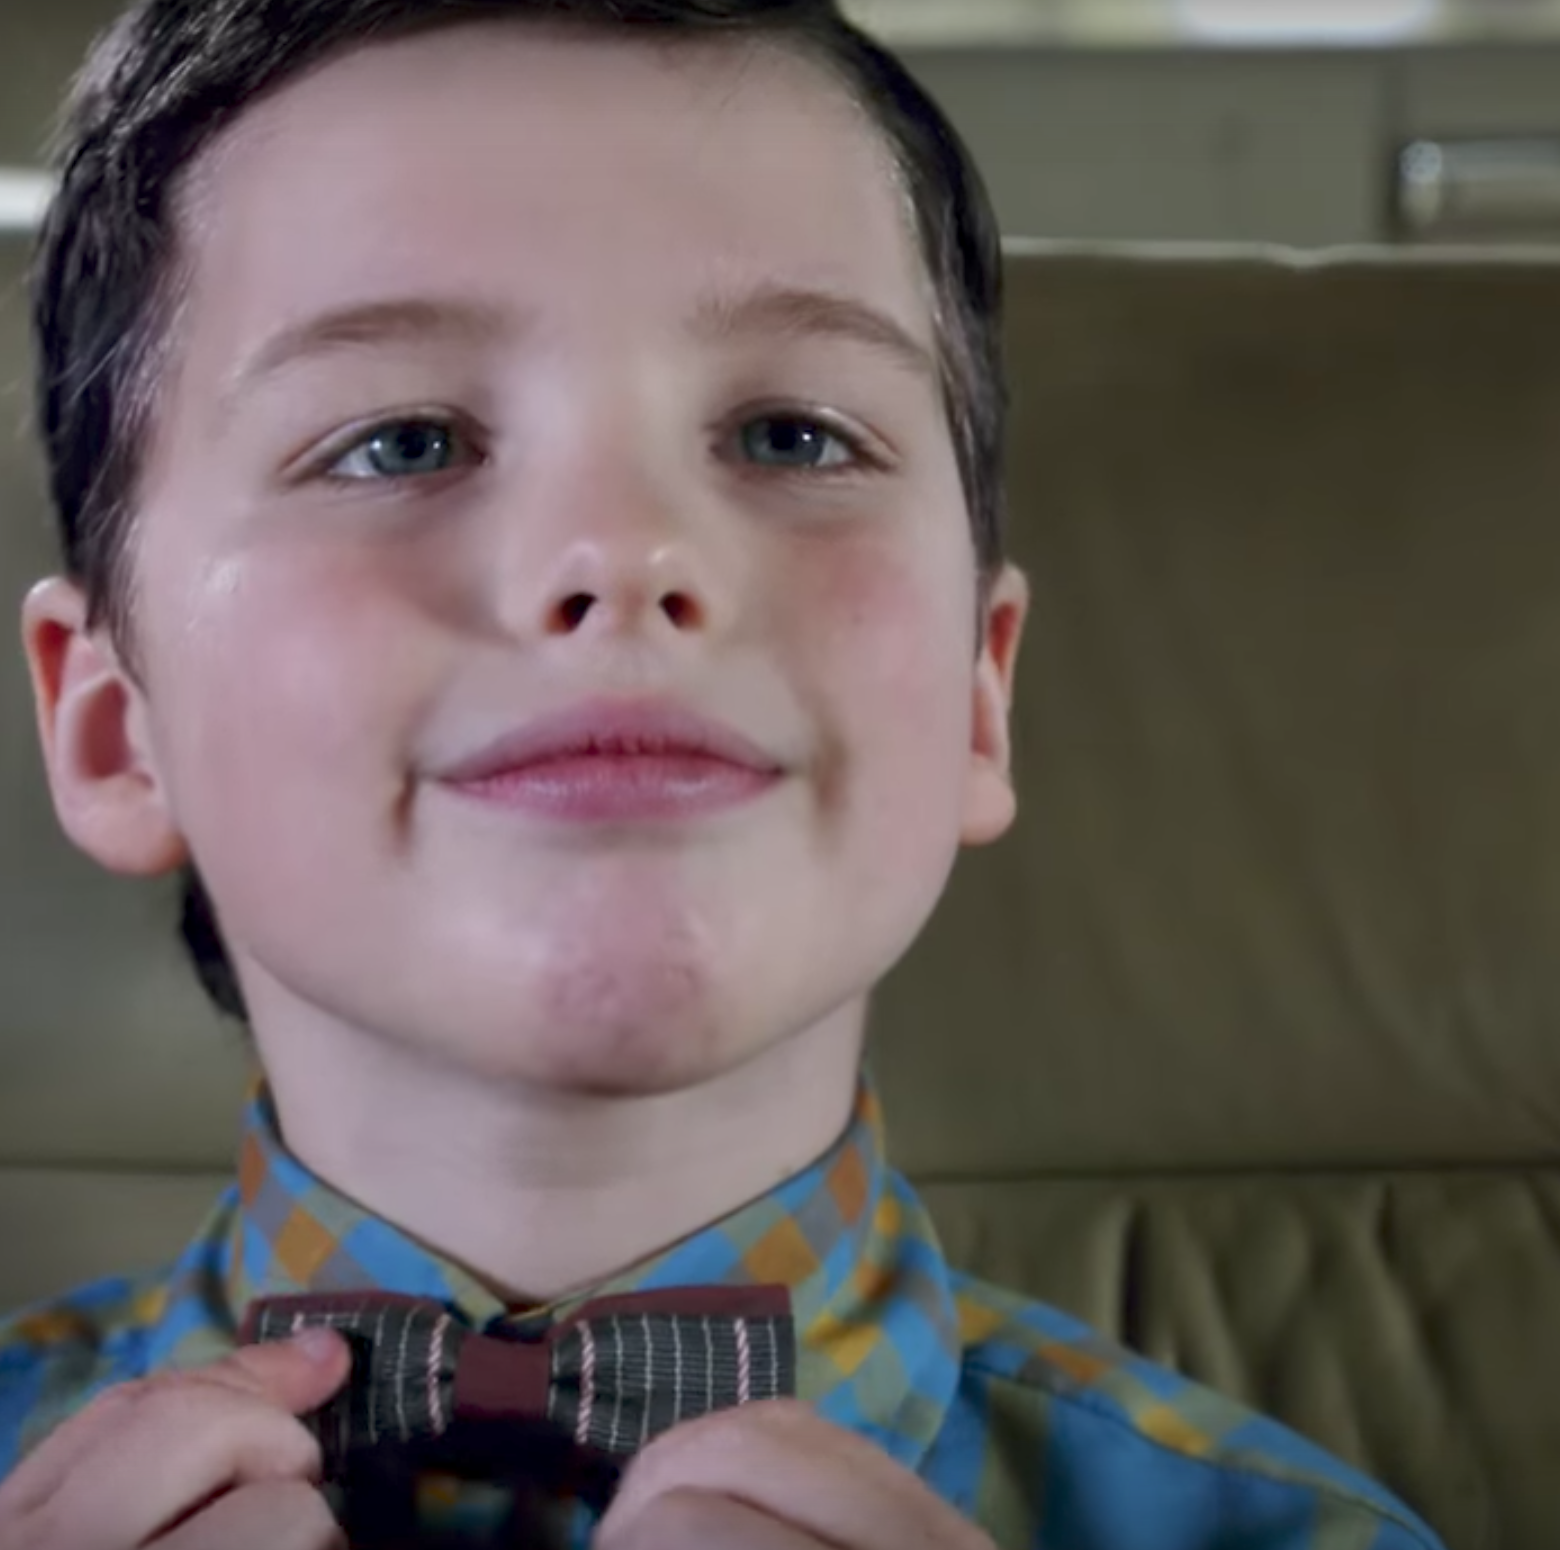 Young Sheldon season 4: everything you need to know